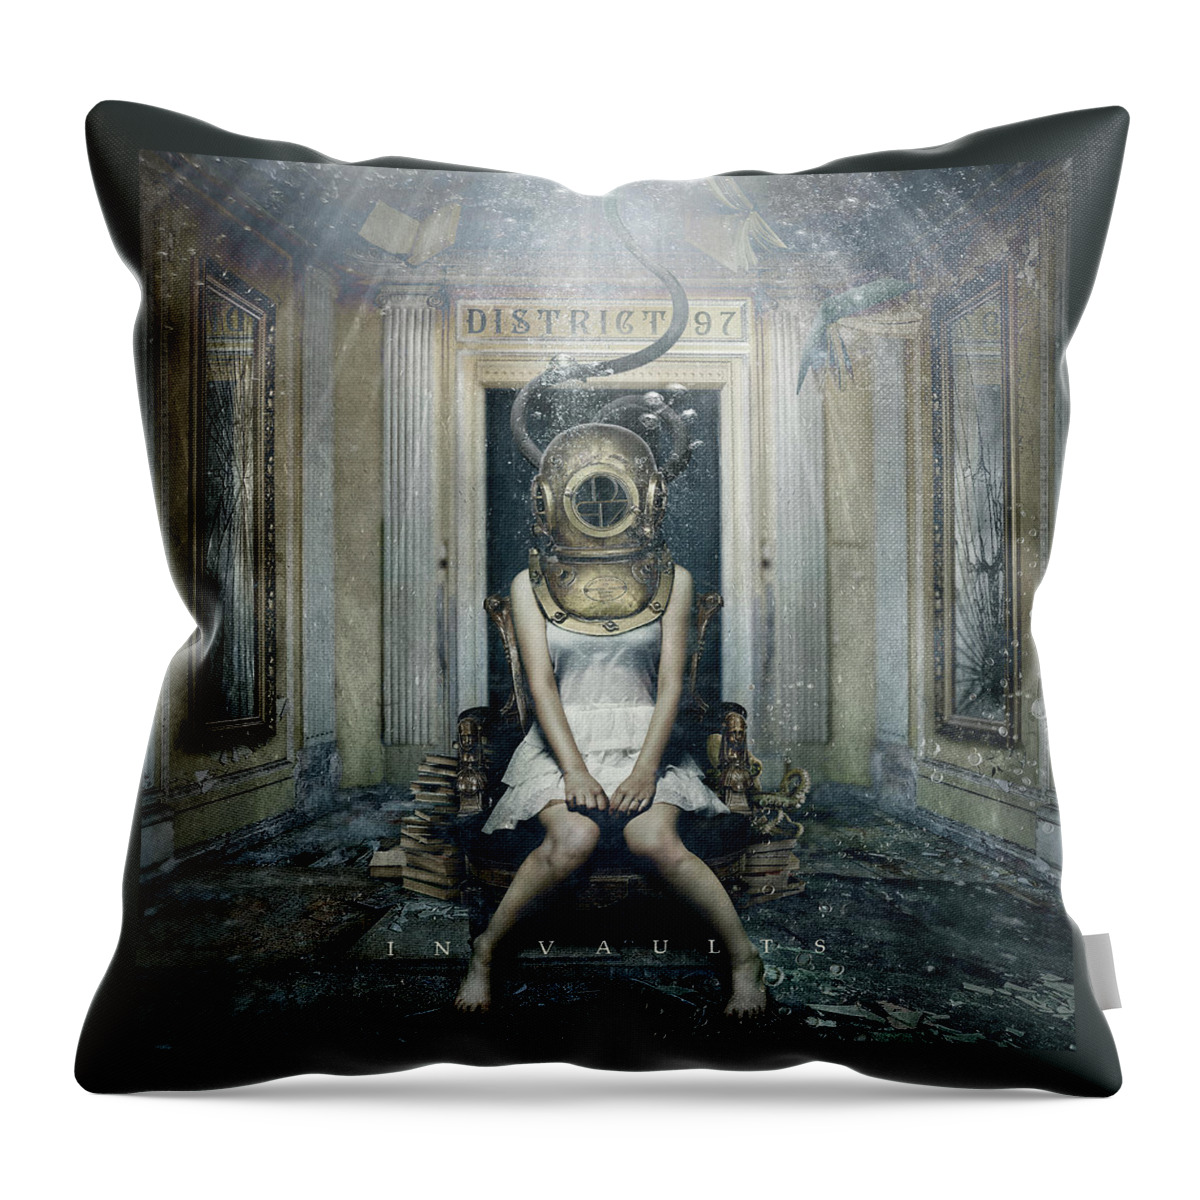  Throw Pillow featuring the digital art In Vaults by District 97